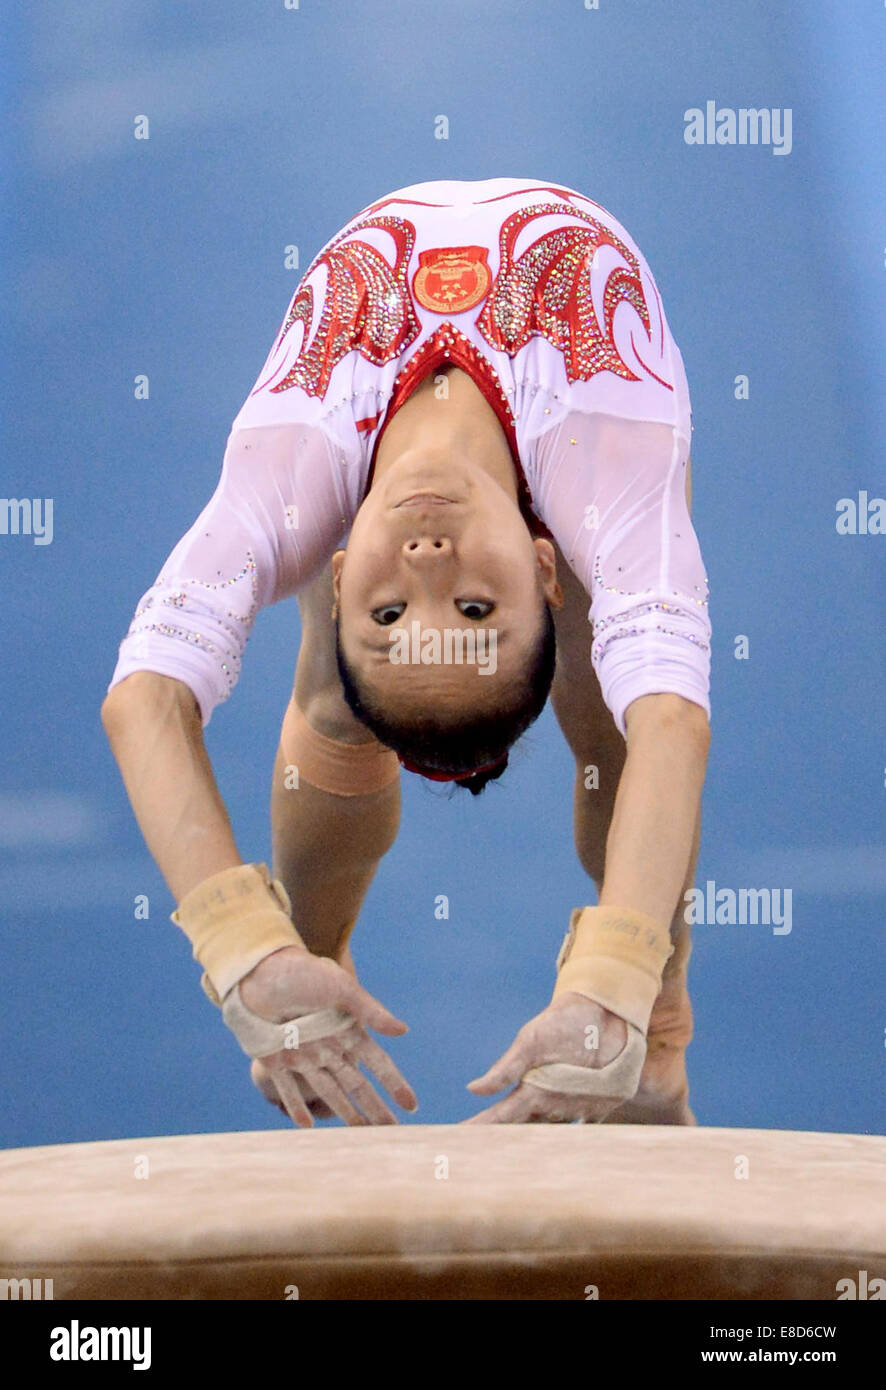 Nanning, China's Guangxi Zhuang Autonomous Region. 6th Oct, 2014. Chinese gymnast Yao Jinnan performs on the vault during the women's qualifying round of the 45th Gymnastics World Championships in Nanning, capital of south China's Guangxi Zhuang Autonomous Region, Oct. 6, 2014. The 45th FIG Artistic Gymnastics World Championships lasts from Oct. 3 to 12 in Nanning. Credit:  Chen Zixia/Xinhua/Alamy Live News Stock Photo